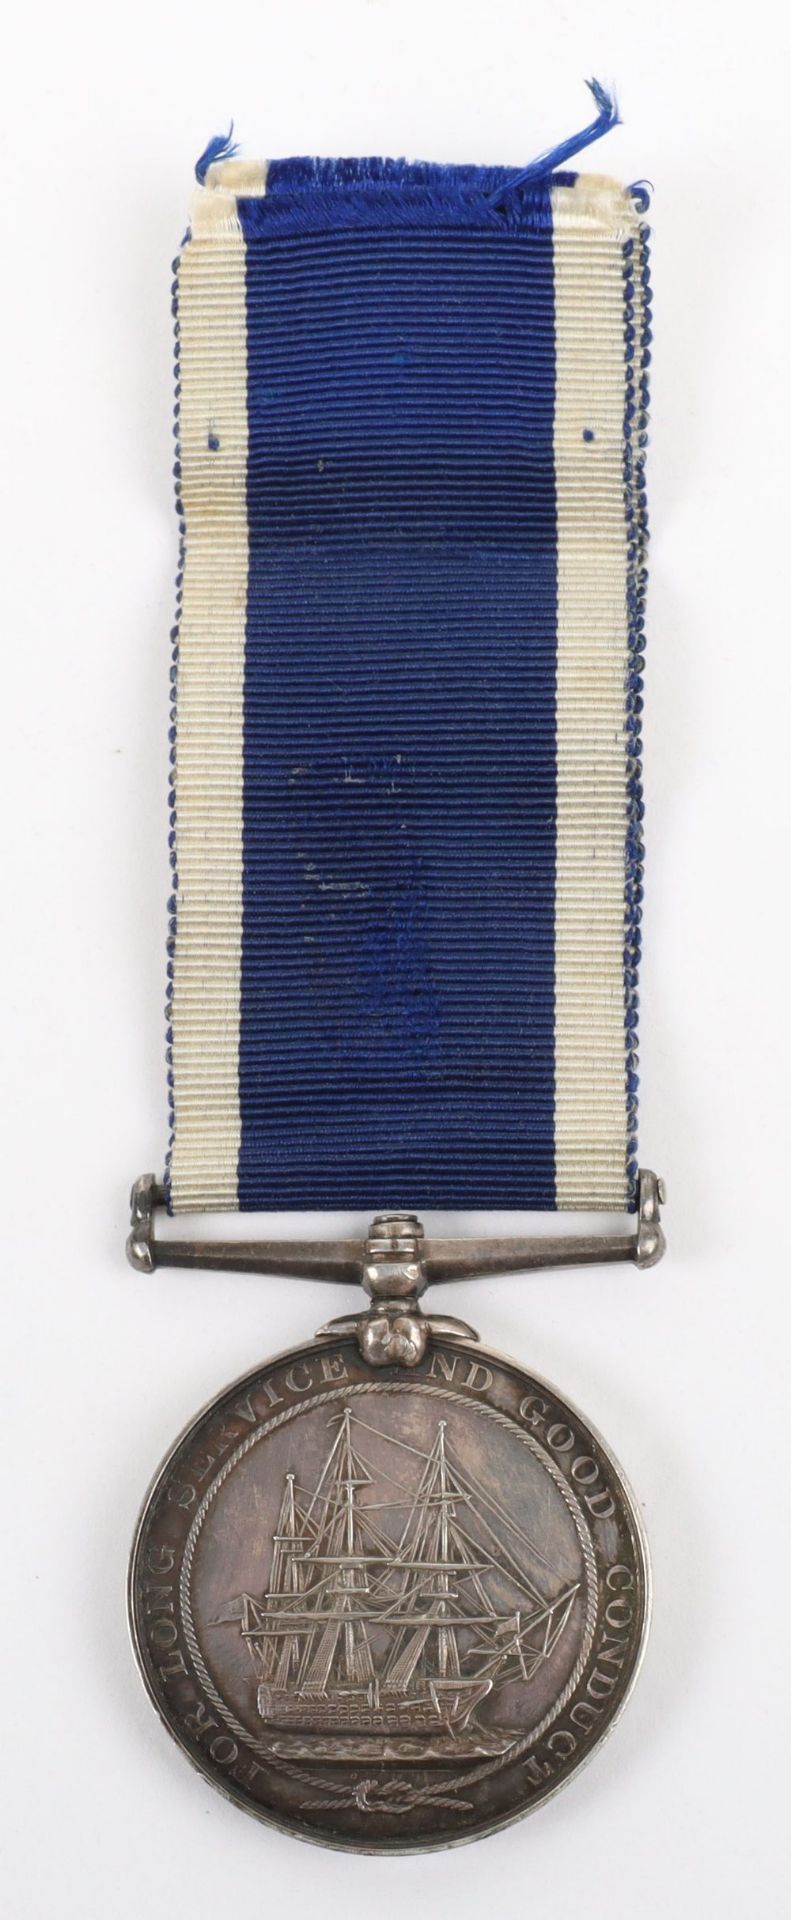 Victorian Royal Naval Long Service and Good Conduct Medal HM Coast Guard - Image 2 of 3